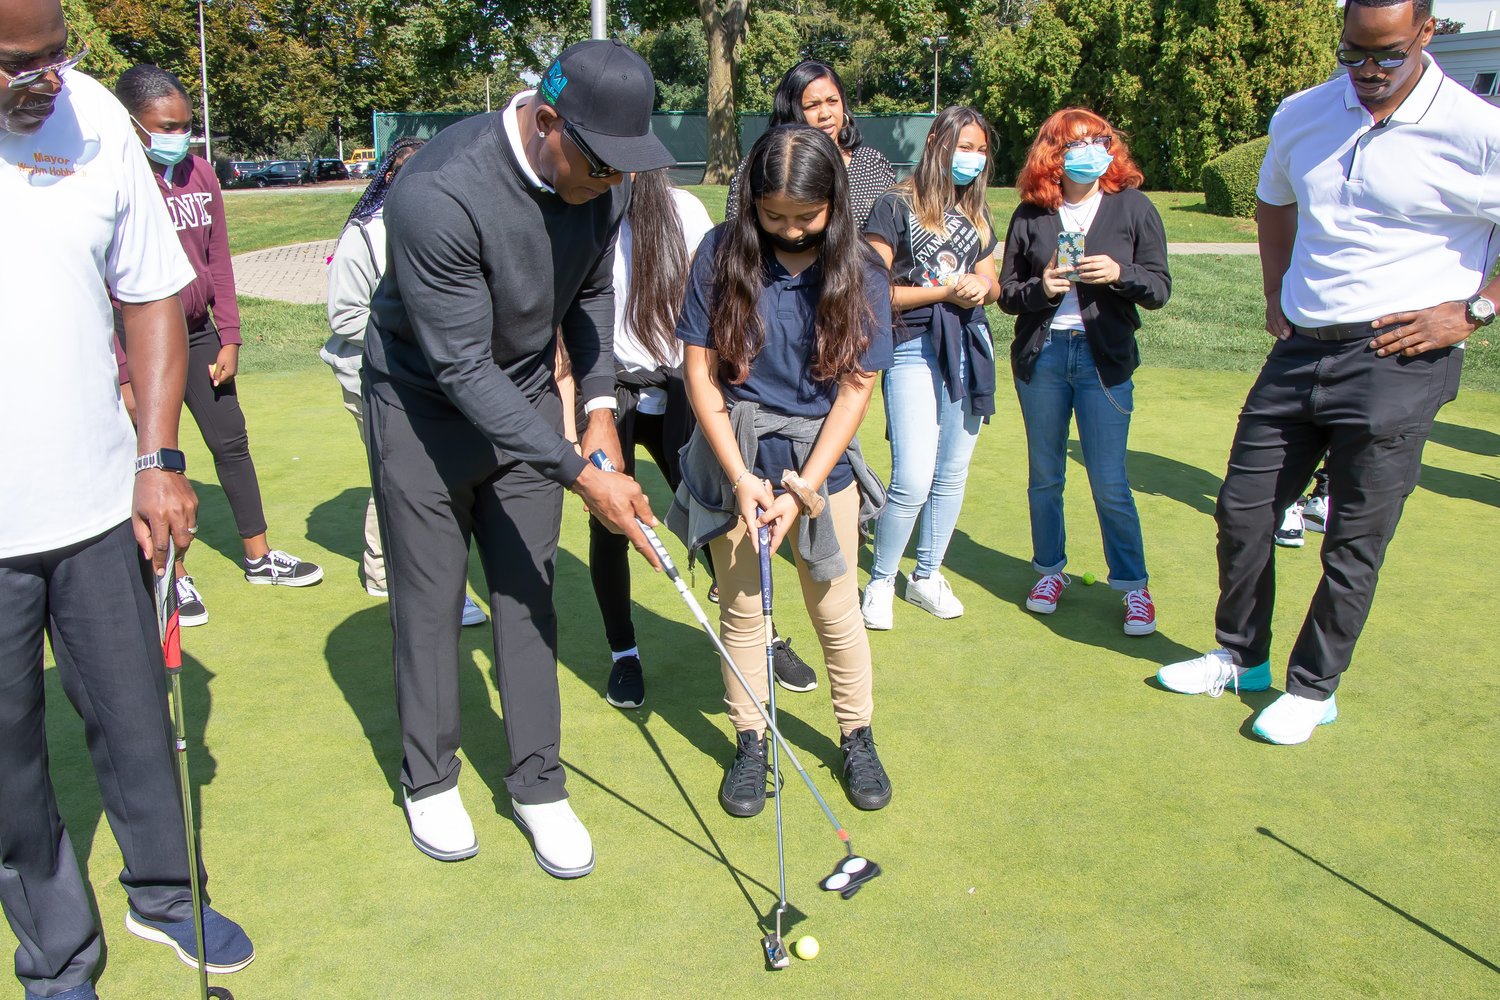 Victor Green demonstrated the art of putting while Mayor Waylyn Hobbs, Jr., left, and teacher-coach Noah Burroughs, right, looked on.